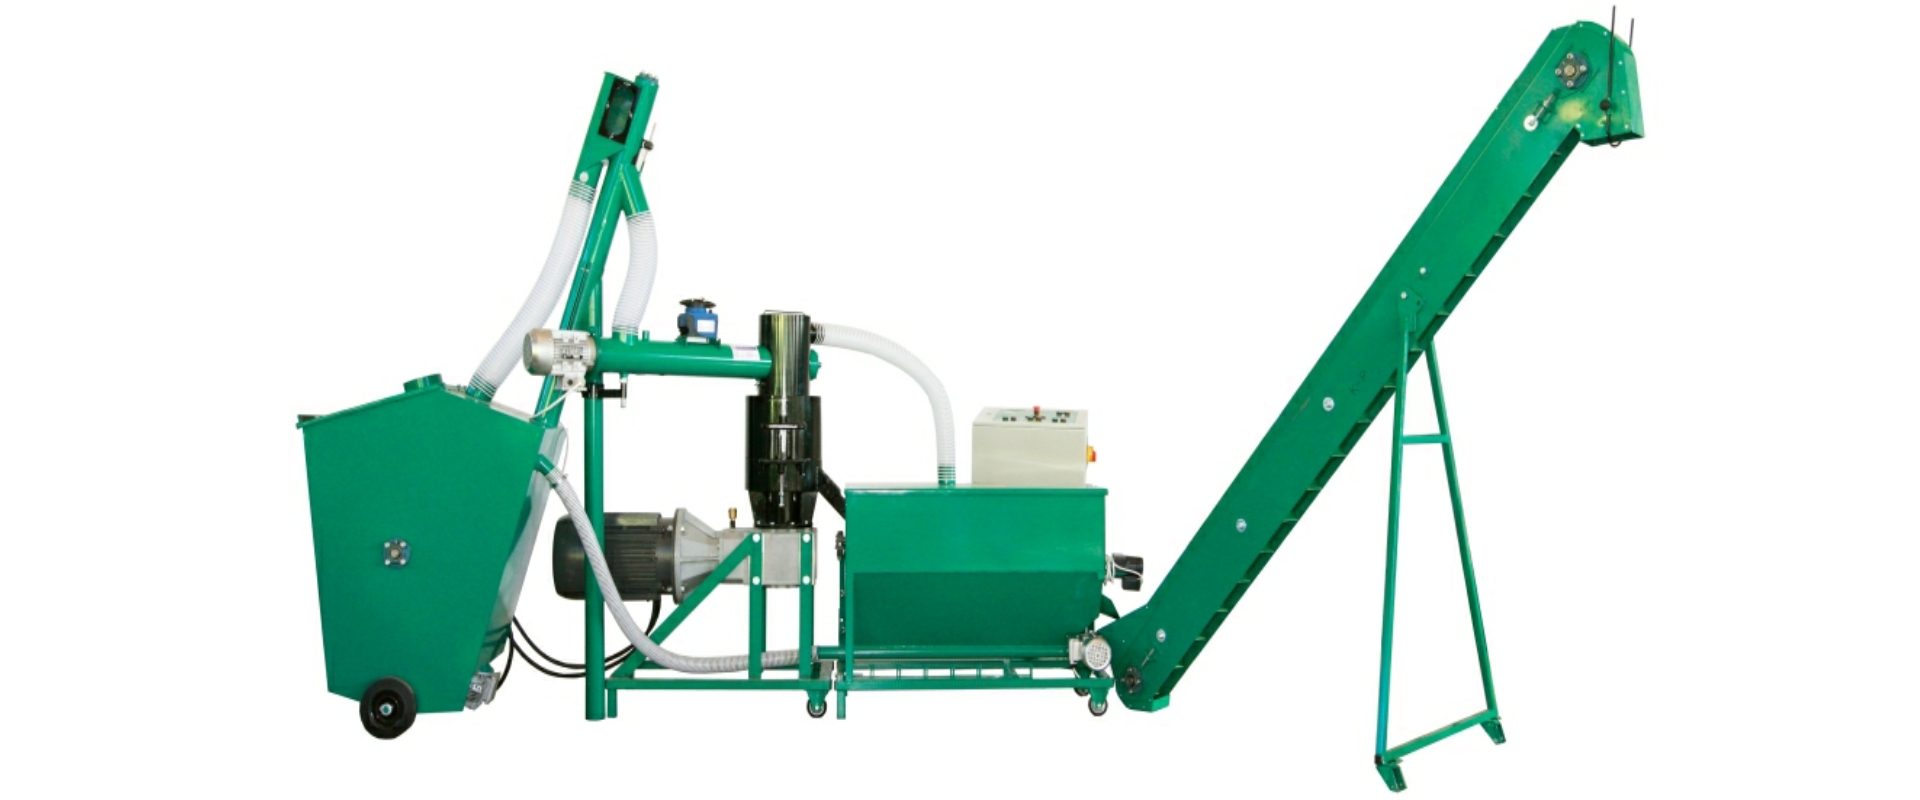 Pellet Mill for Sale | SmallPelletMill.com - Industrial machine Pellet Mill for Sale. Get our pelletizing unit and produce pellets for yourself your customers. Our pelletizing line produces wood,